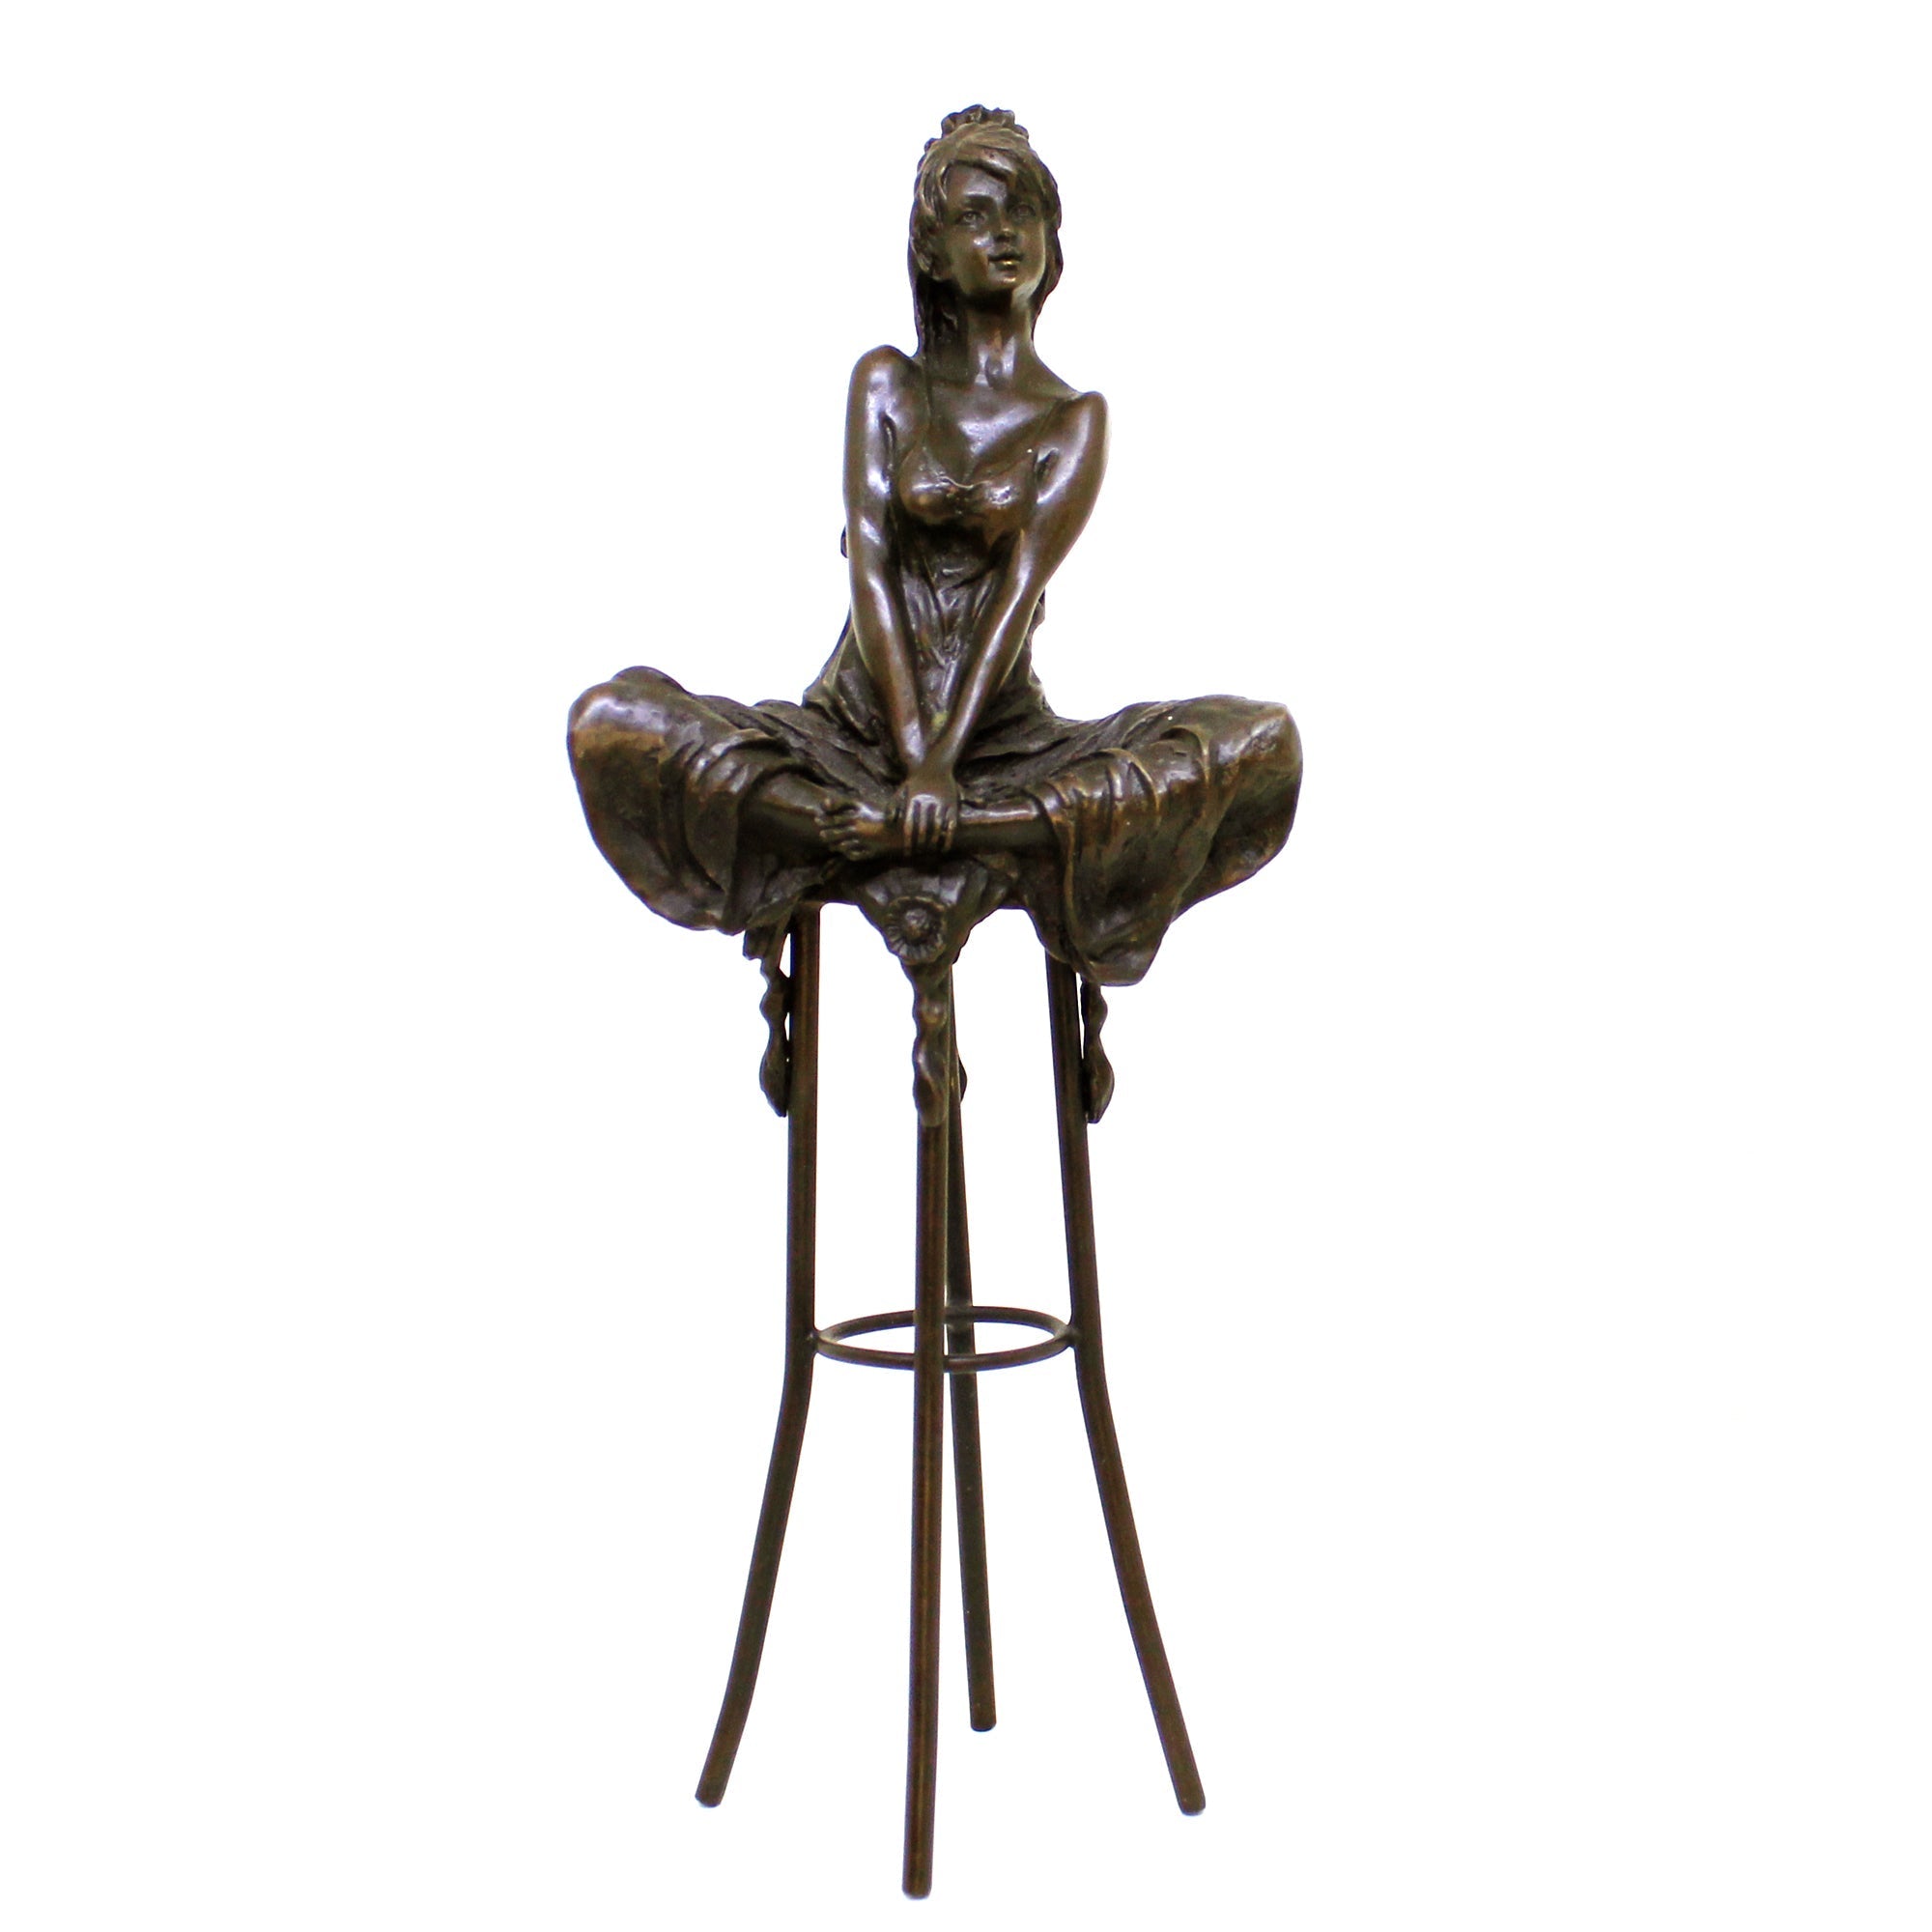 Woman on a Chair - Lotos